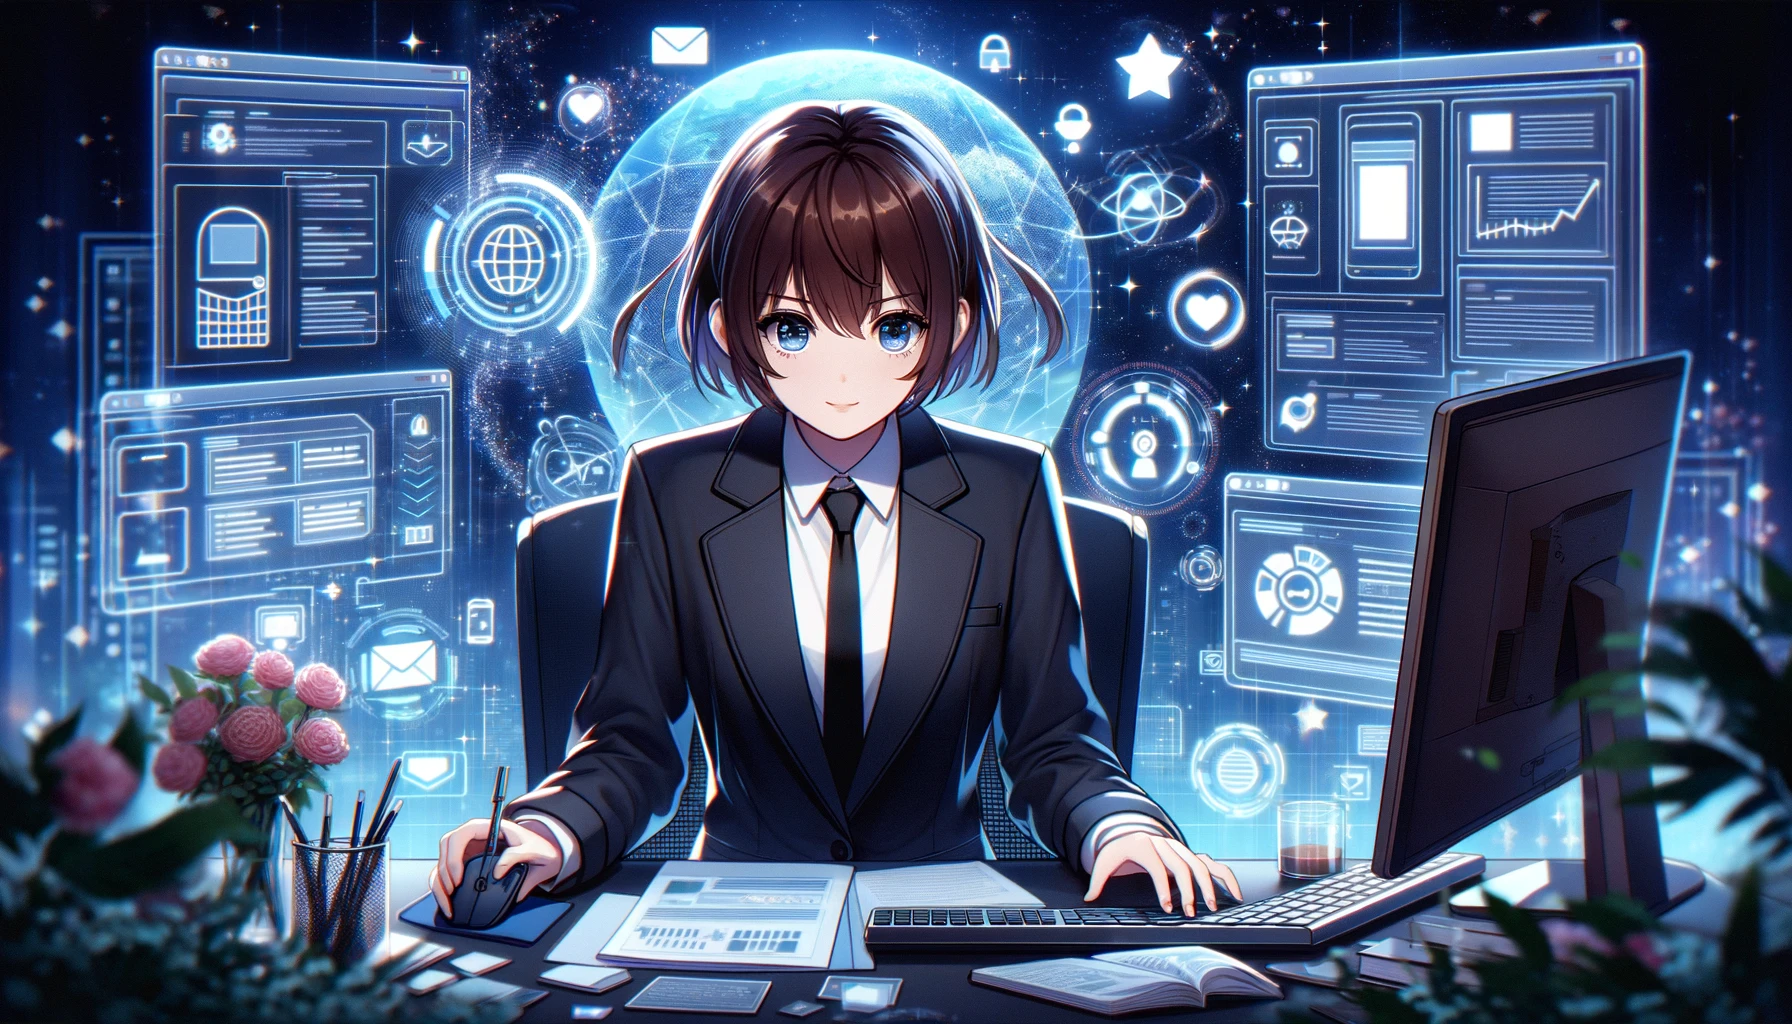 Mobile friendly websites: SEO Sempai at her computer, surrounded by symbols representing mobile-friendly website design. The scene is infused with magical energy and futuristic technology, emphasizing the importance of optimizing websites for mobile devices in today's digital landscape.